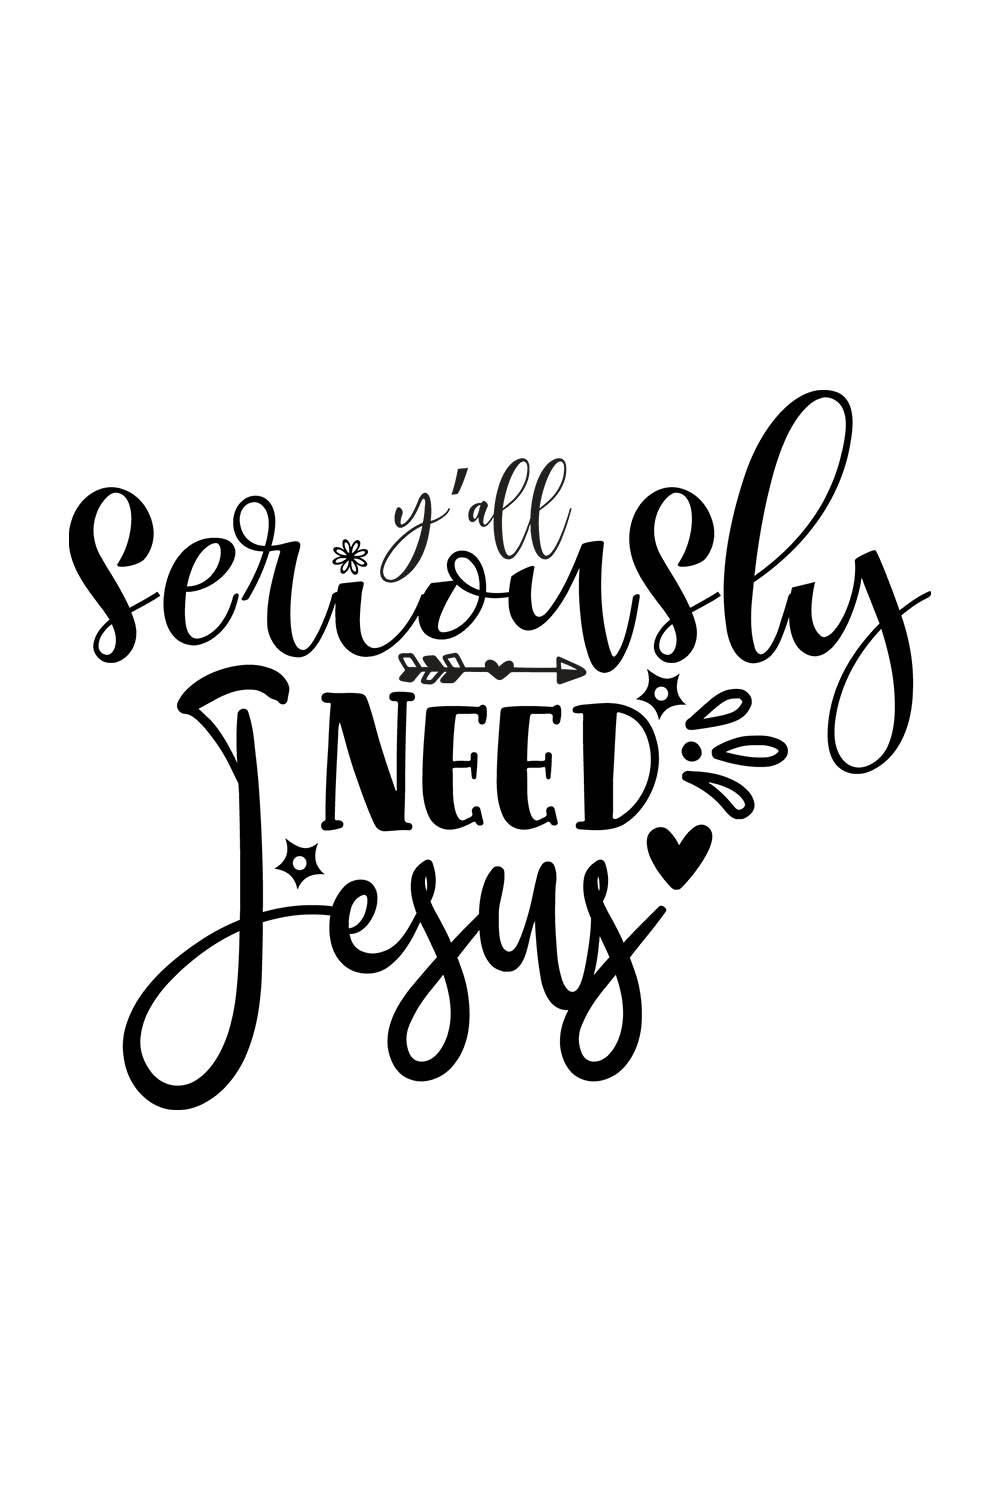 Image with adorable black lettering for prints Yall Seriously Need Jesus.